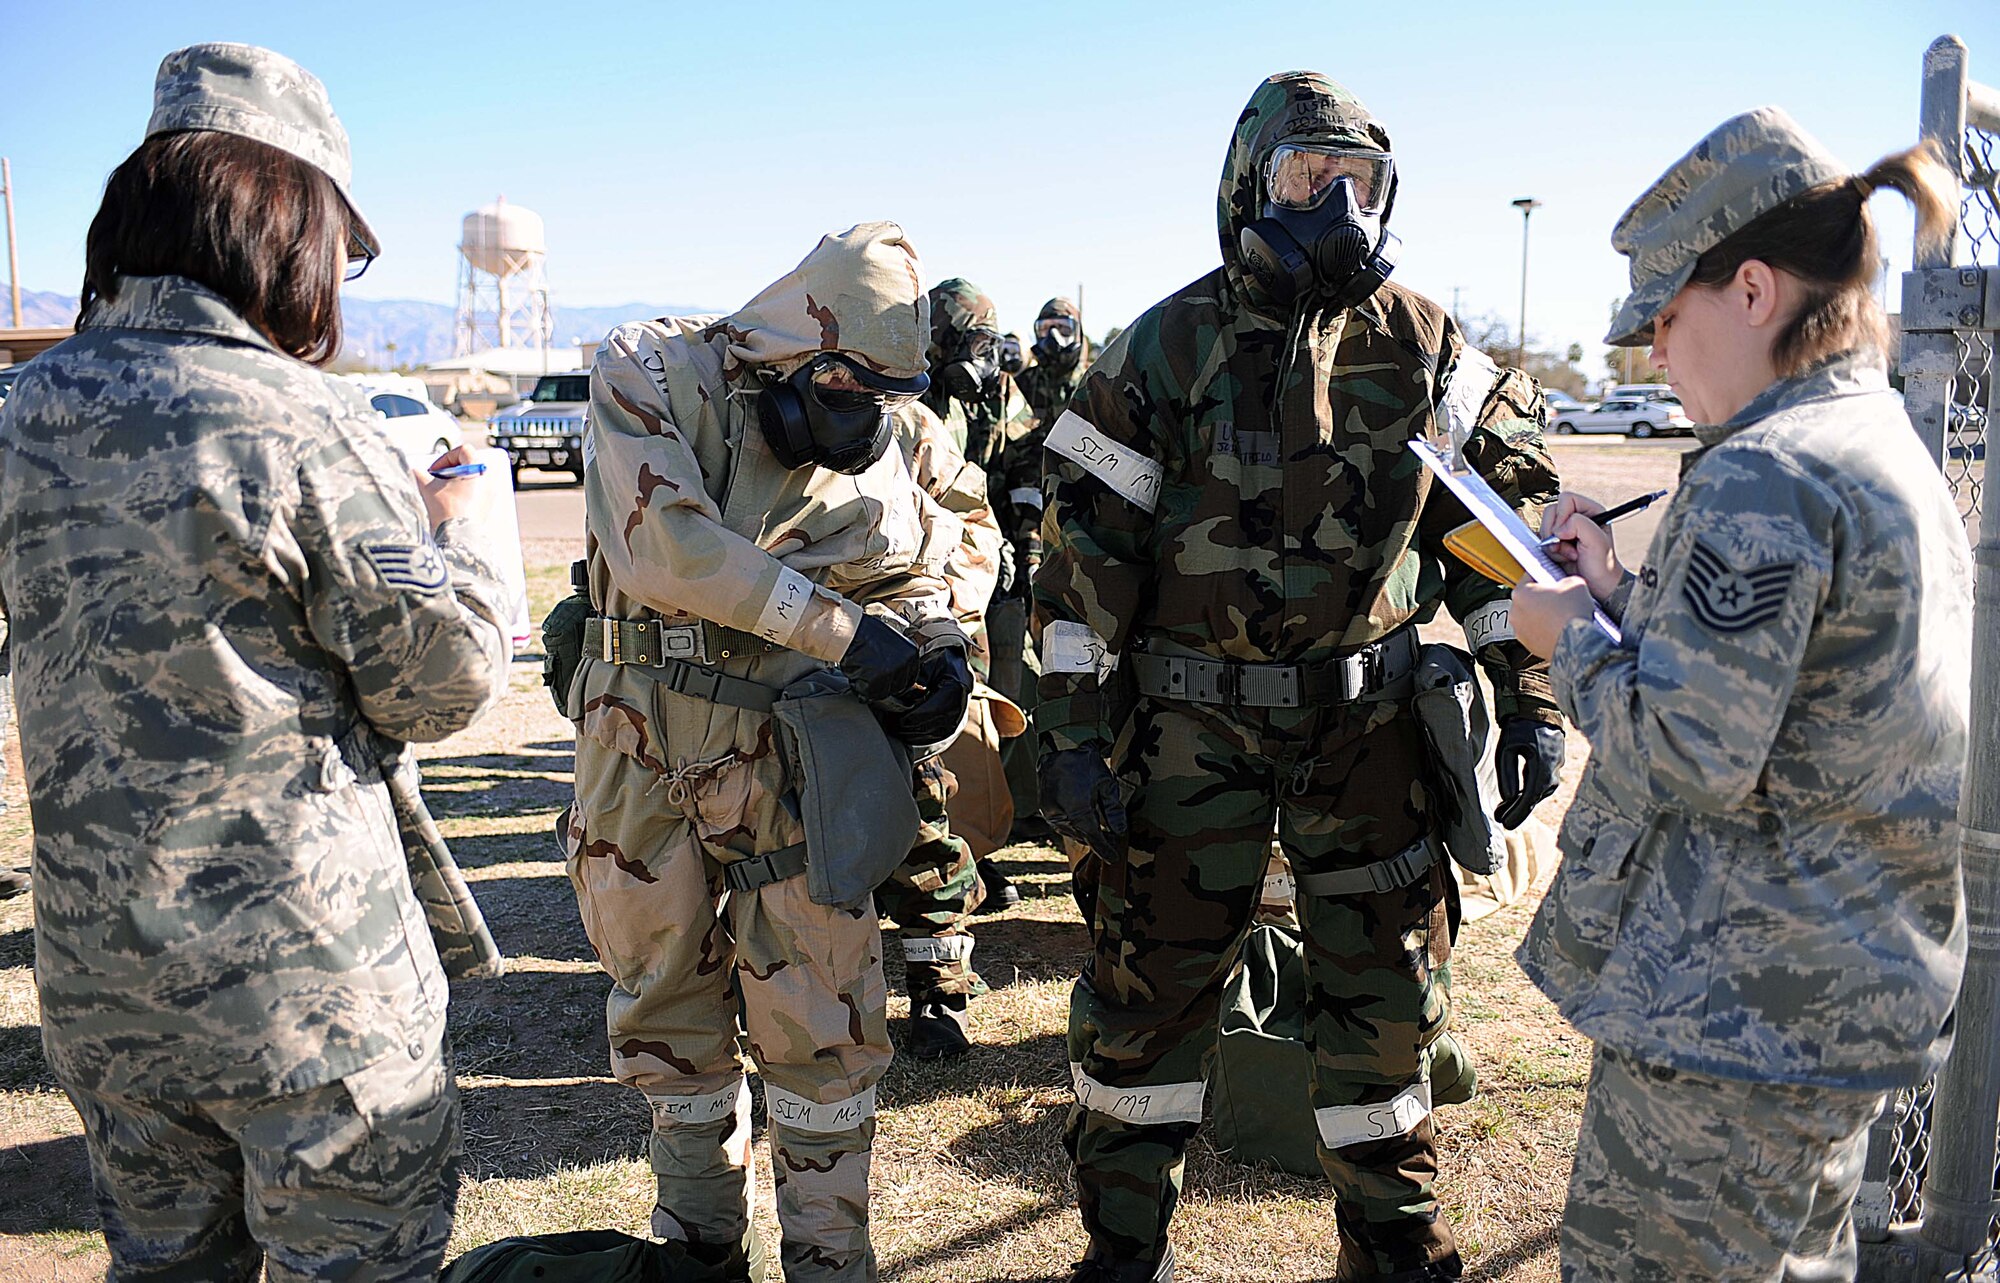 U.S. Air Force Staff Sgt. Lisa Brow and Tech. Sgt. Shawna Hopp, 355th Civil Engineer Squadron exercise evaluation team, perform mission oriented protective posture equipment checks on player Airmen from the 355th Fighter Wing on Davis-Monthan Air Force Base, Ariz., March 13, 2013. Airmen processed through the contamination control area as part of their training during the exercise. (U.S. Air Force photo by Airman 1st Class Christine Griffiths/Released)